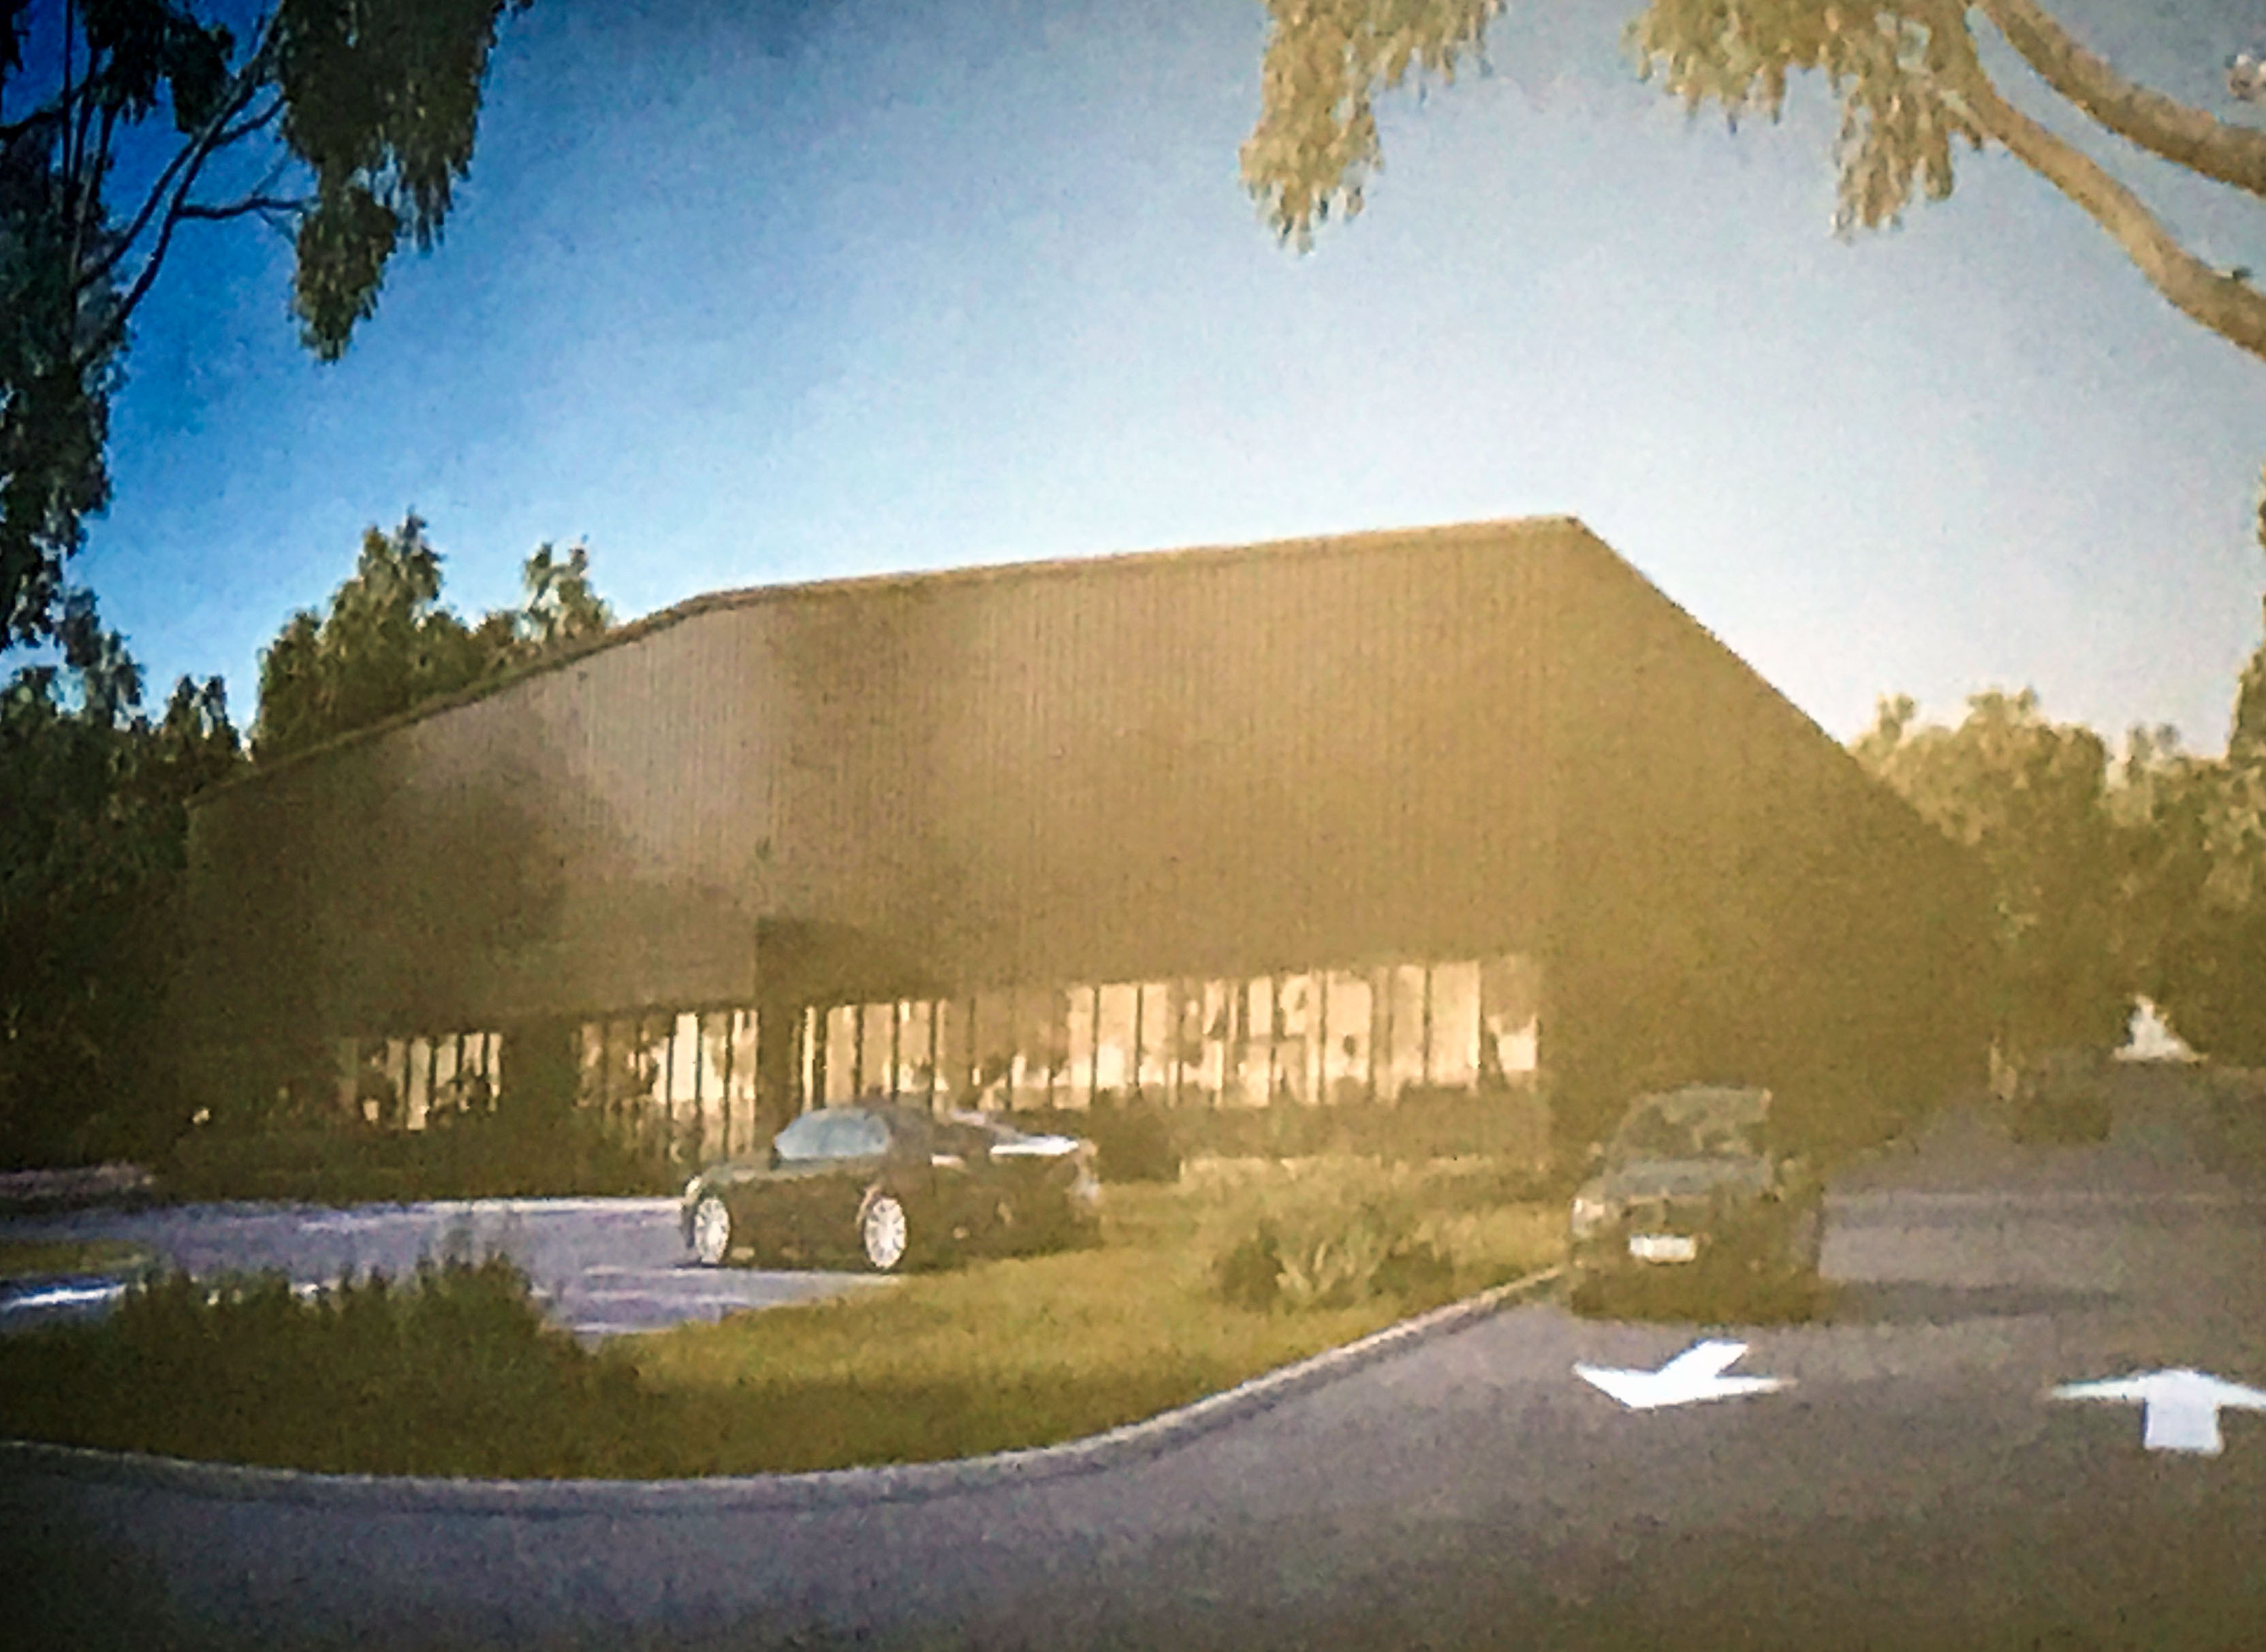 A rendering of a proposed medical marijuana grow house in Brick. (Photo: Daniel Nee)